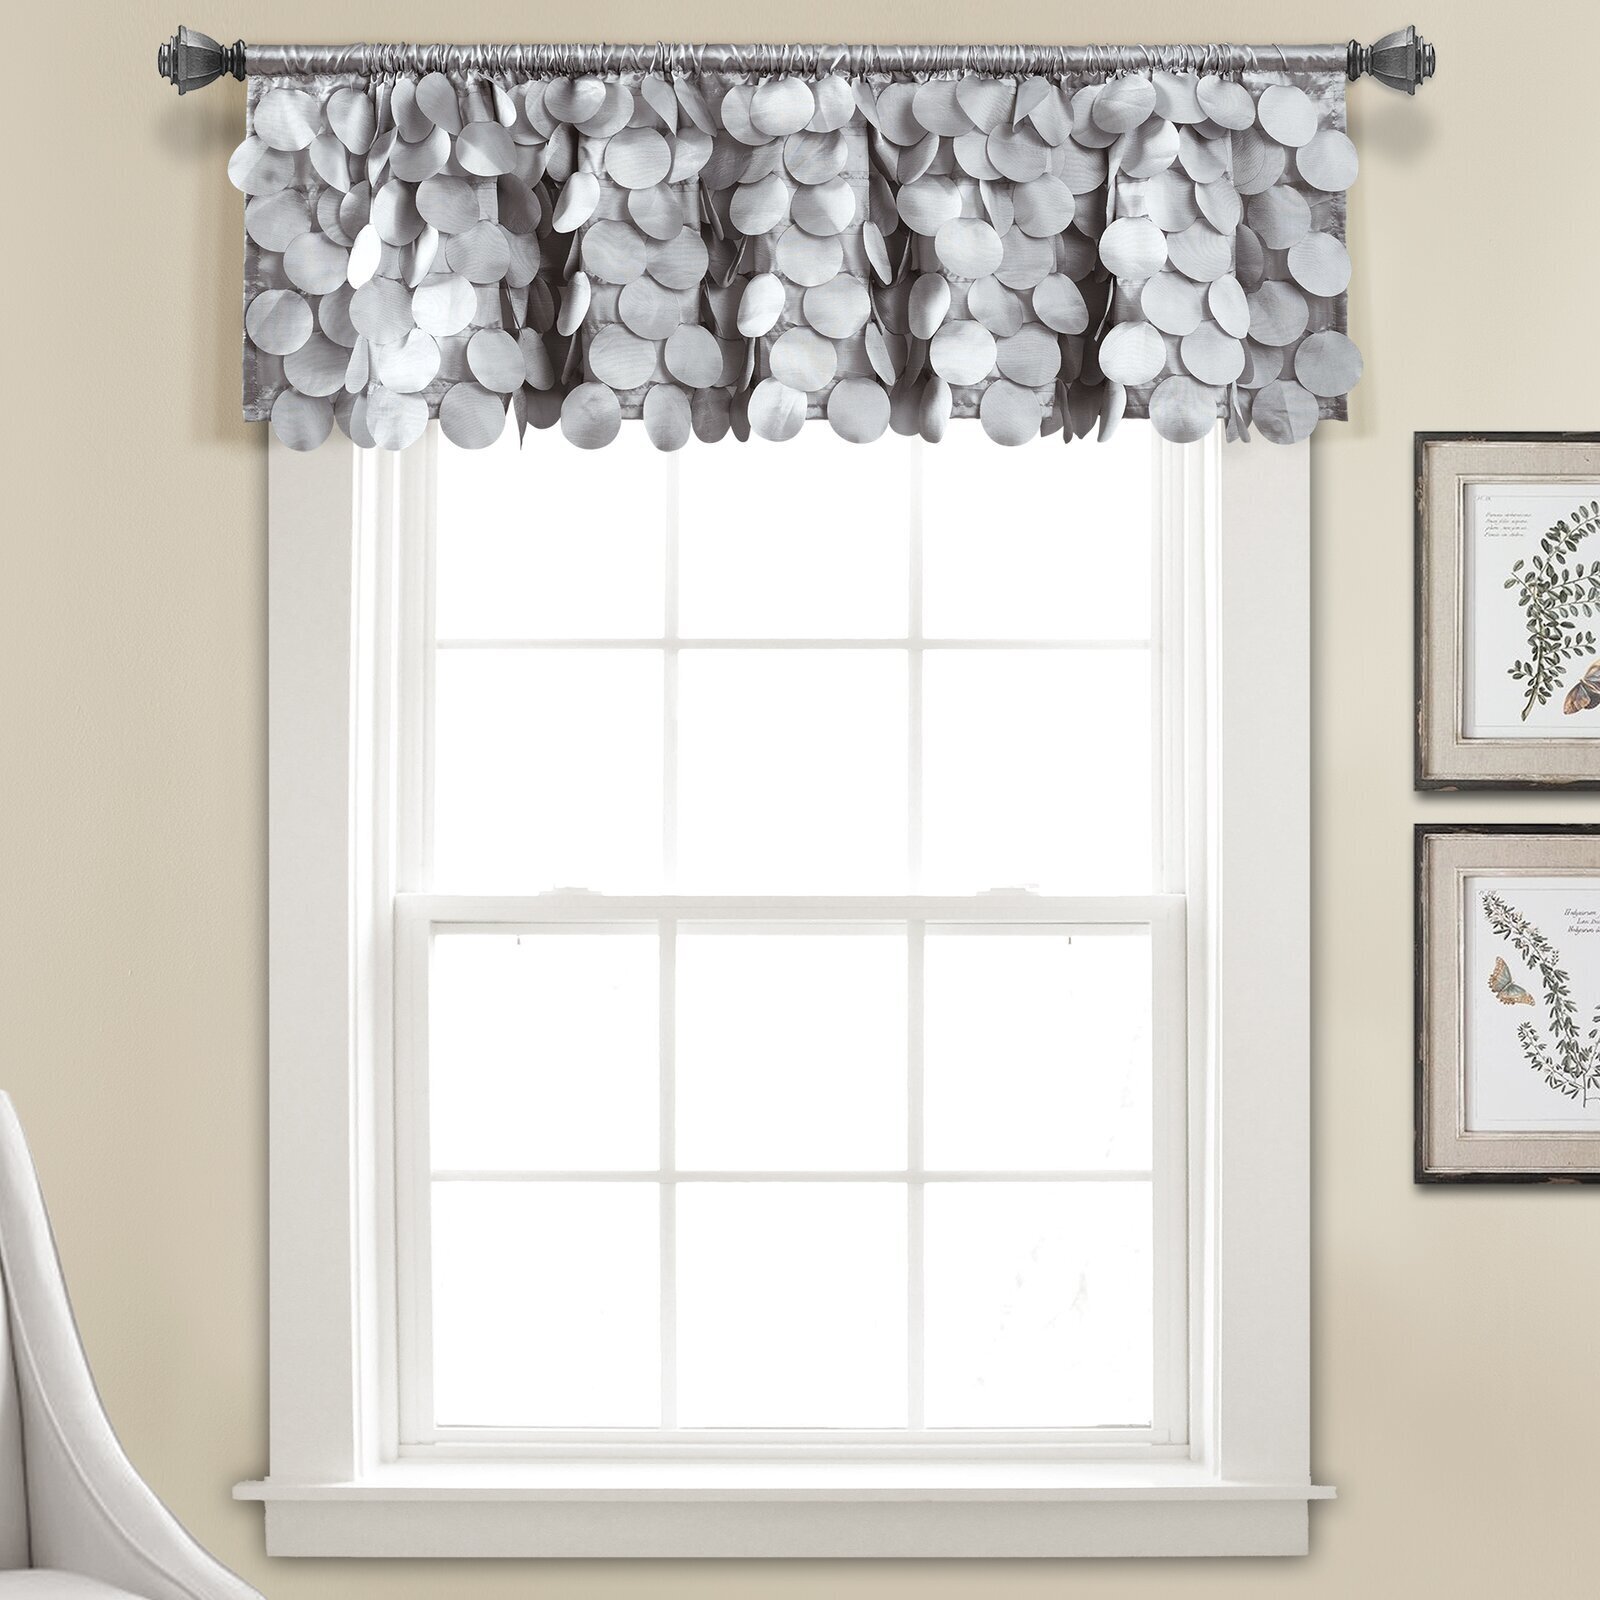 Glam Valance Curtain for Kitchen